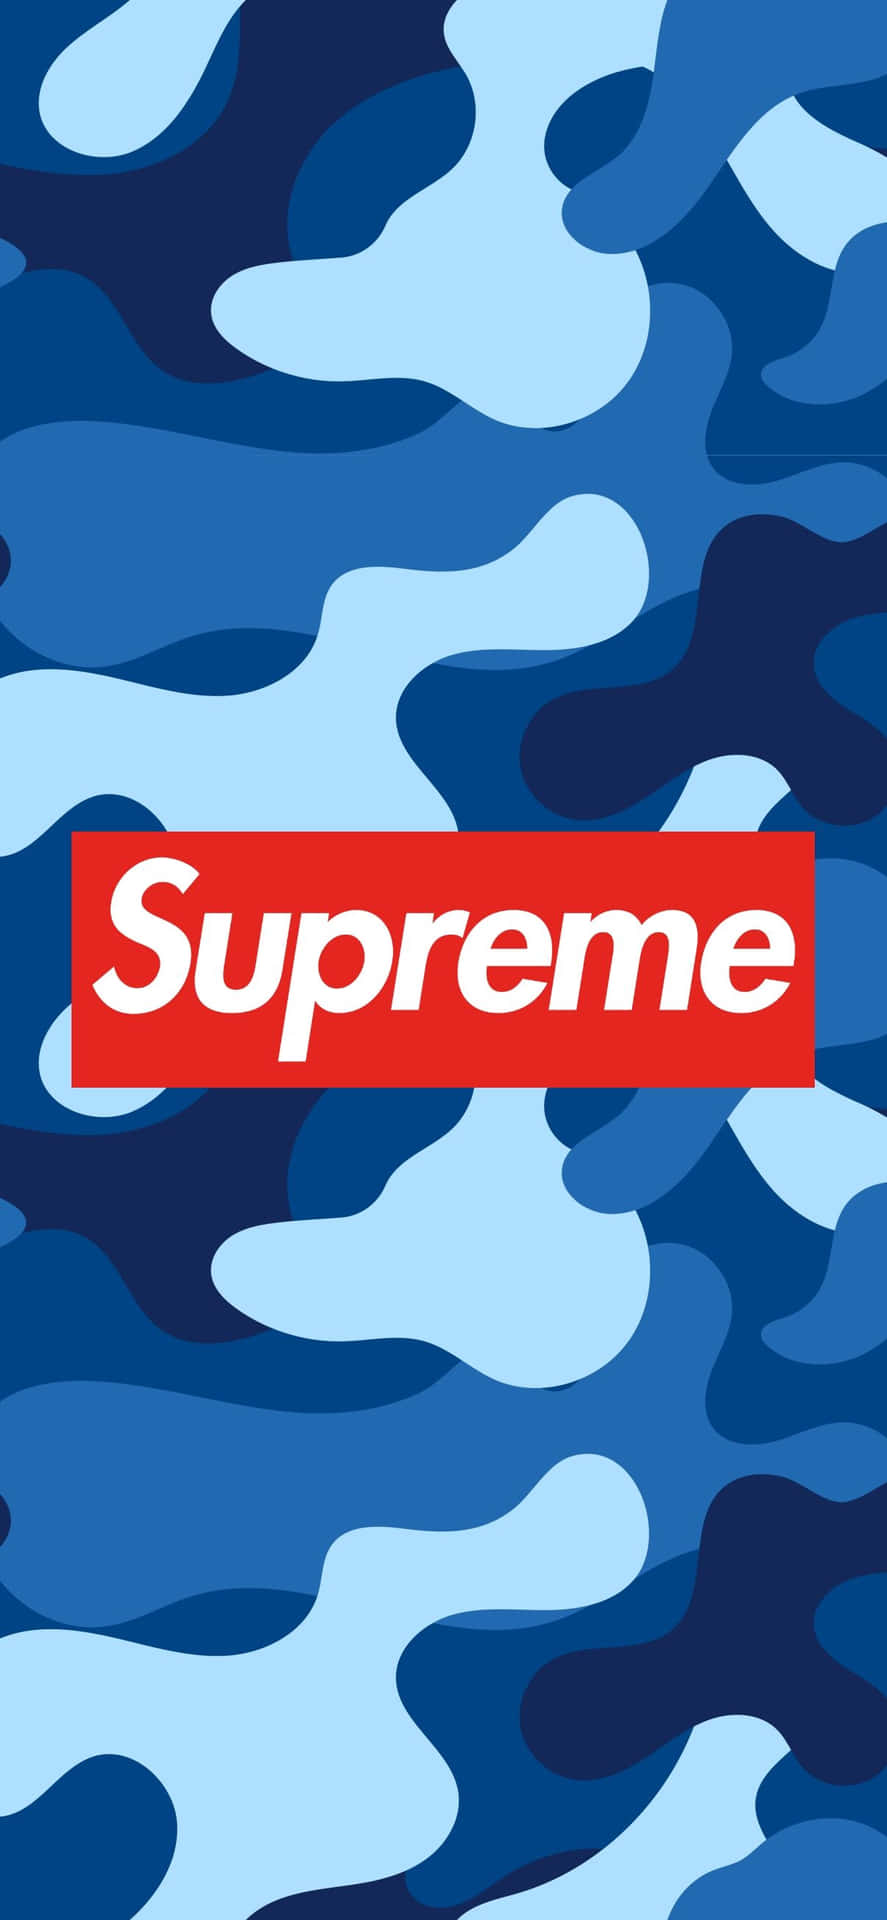 Supreme wallpaper by ZetroVerse  Download on ZEDGE  2ab0